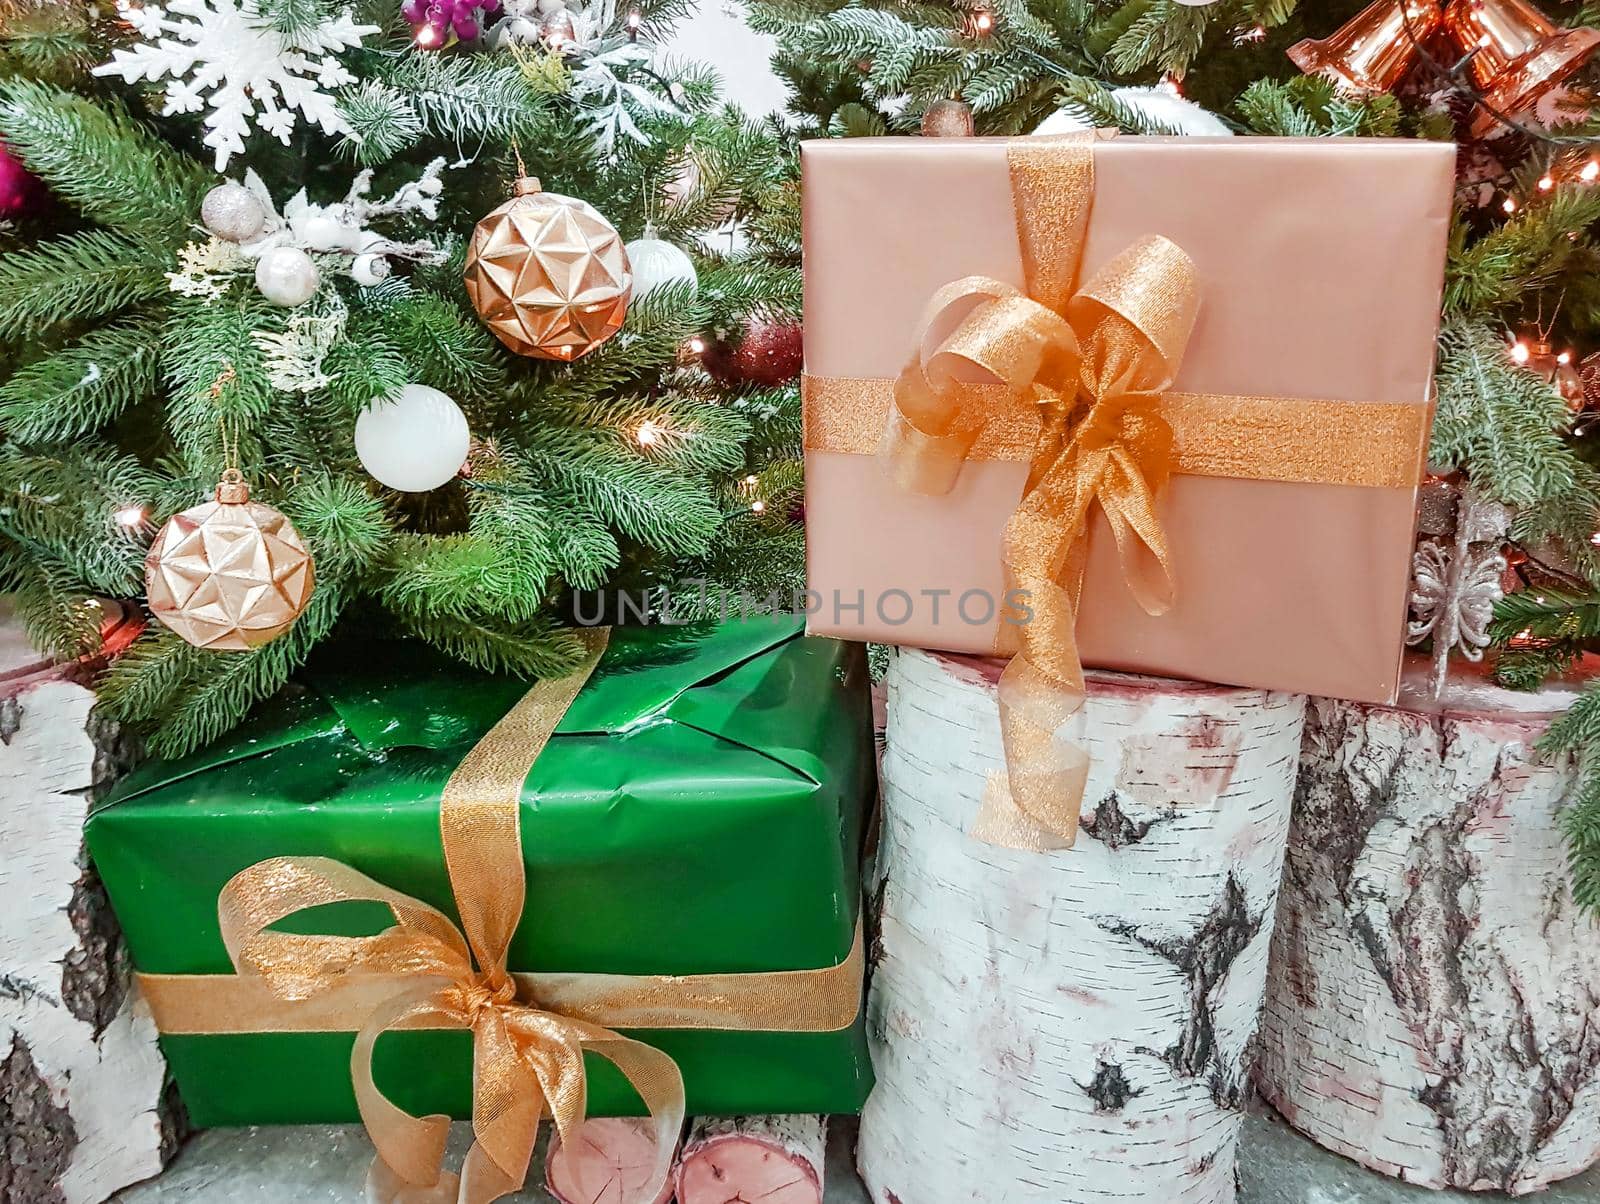 Beautiful boxes wrapped in gold paper with Christmas gifts on a birch stump near the Christmas tree in the room.